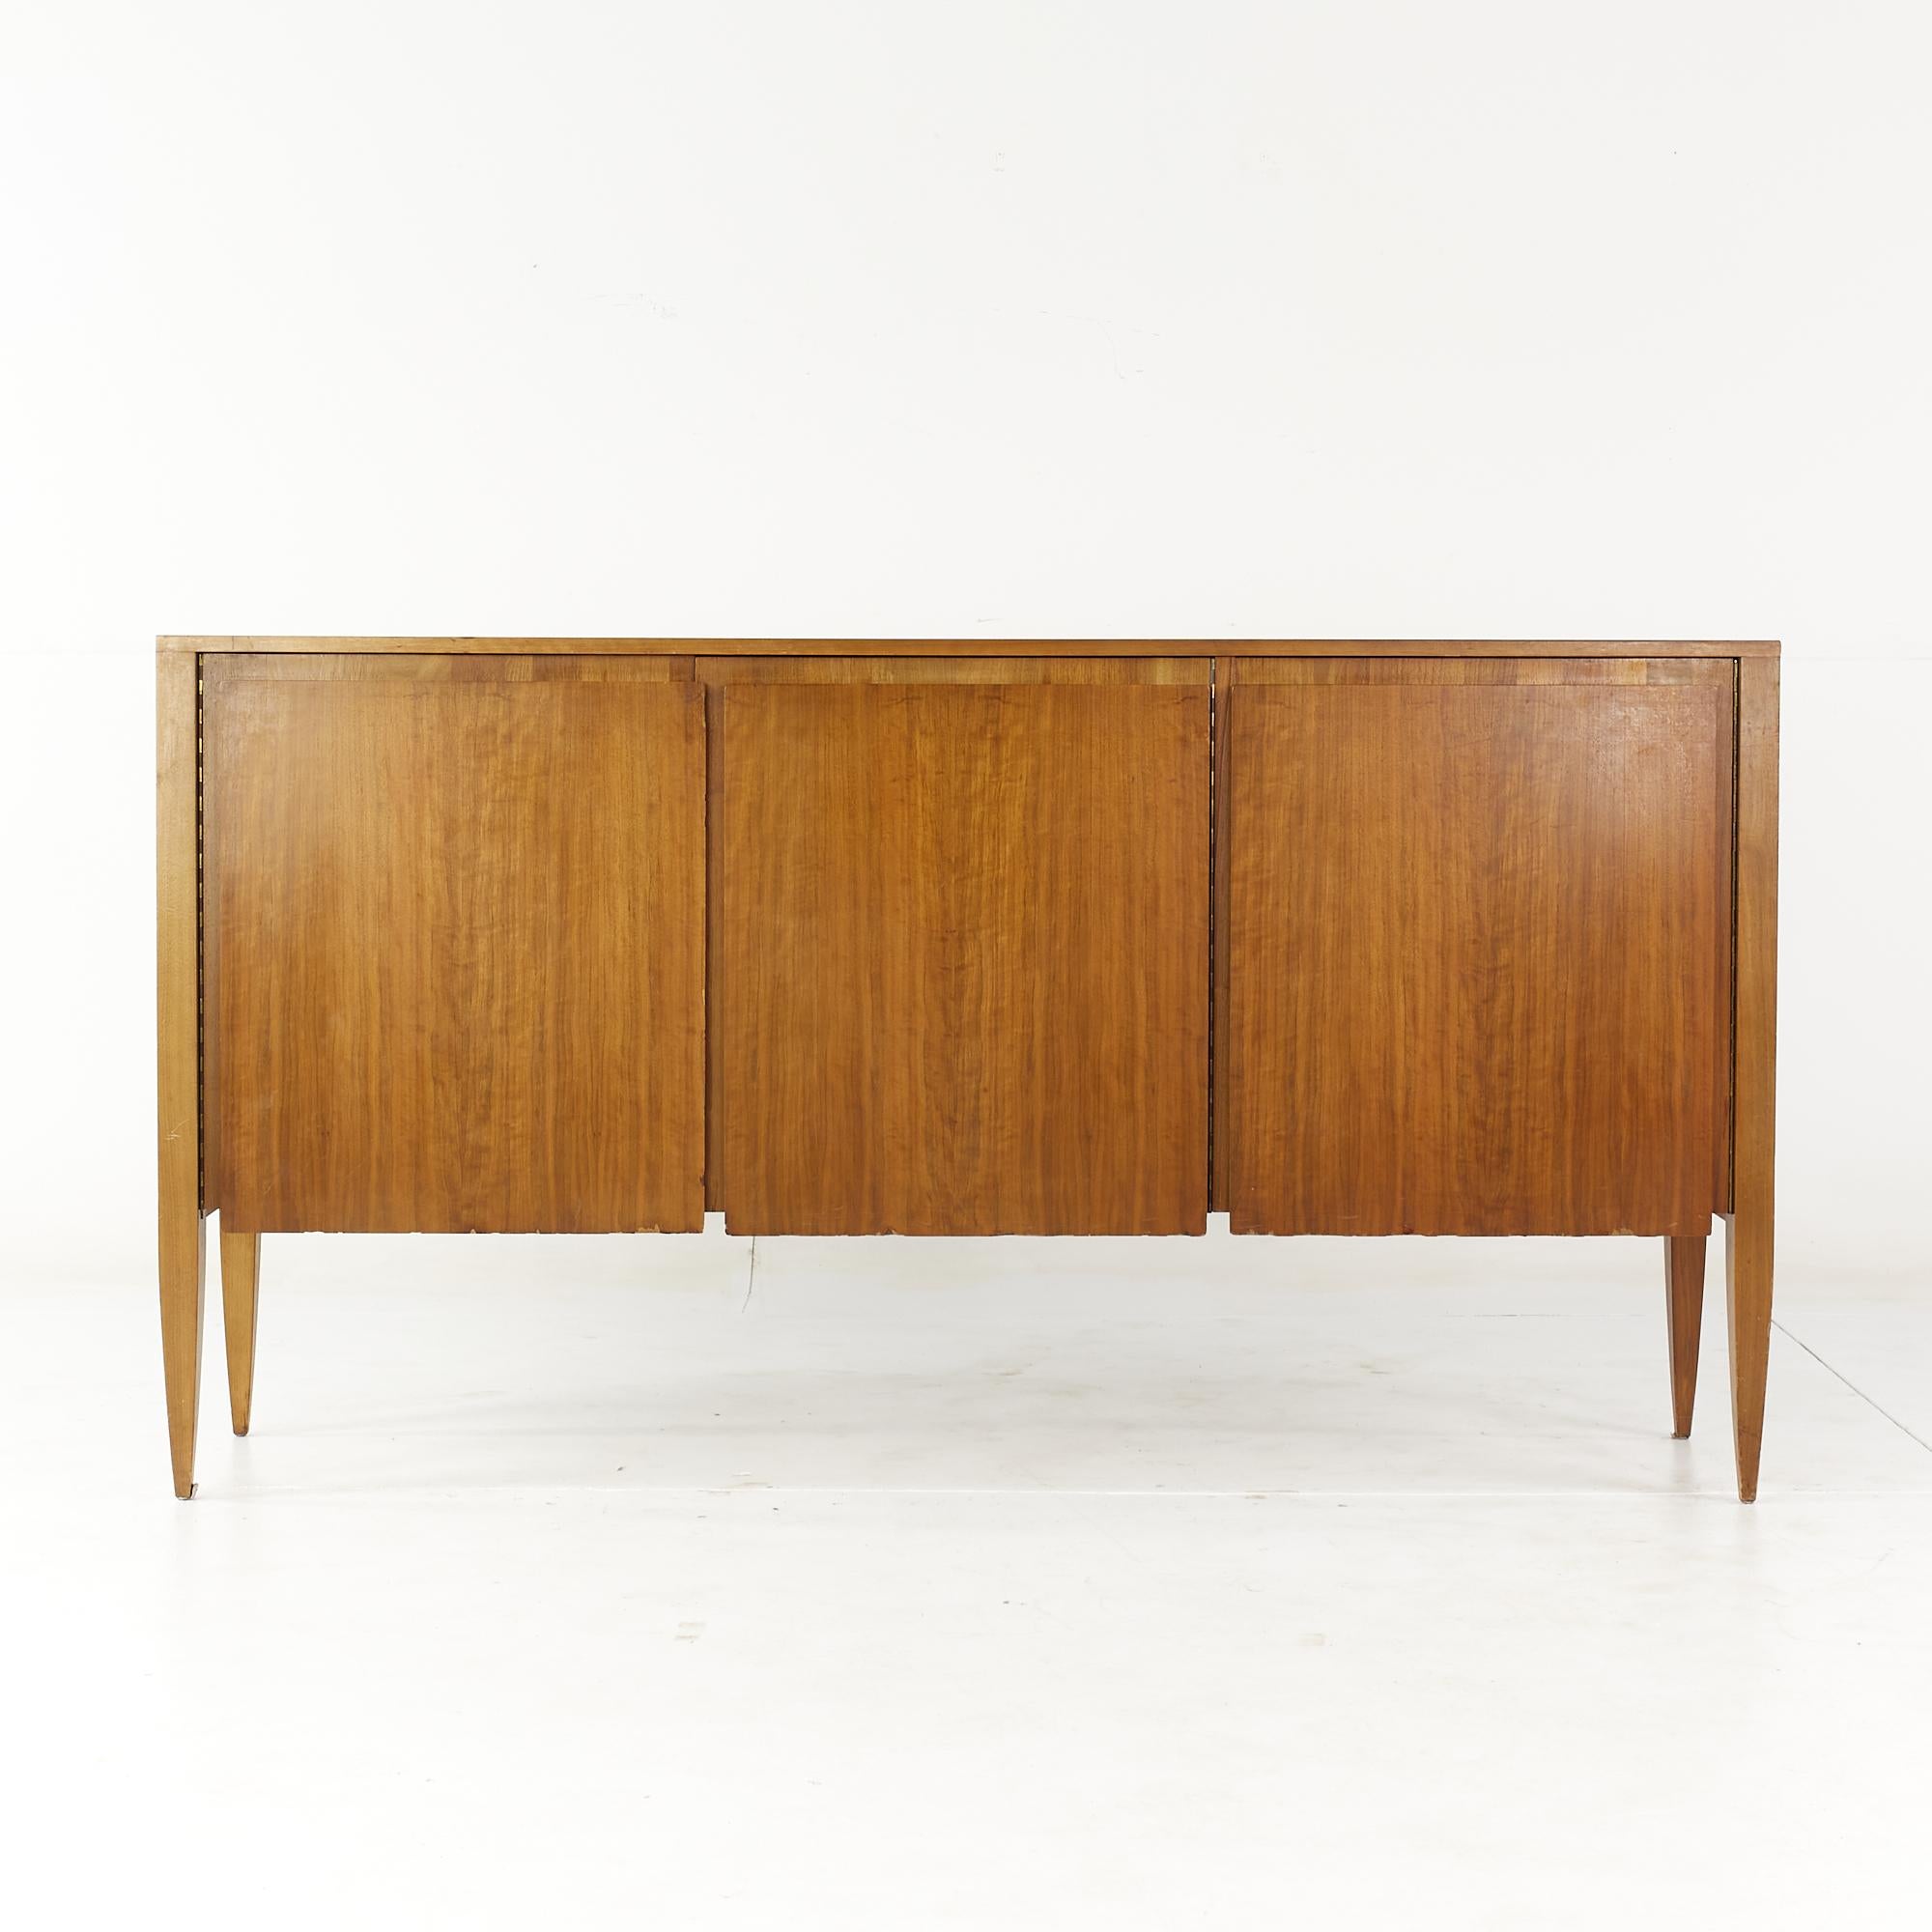 Gio Ponti for Singer and Sons Mid Century Model 2160 walnut cabinet

This cabinet measures: 69.75 wide x 19 deep x 37.5 inches high

All pieces of furniture can be had in what we call restored vintage condition. That means the piece is restored